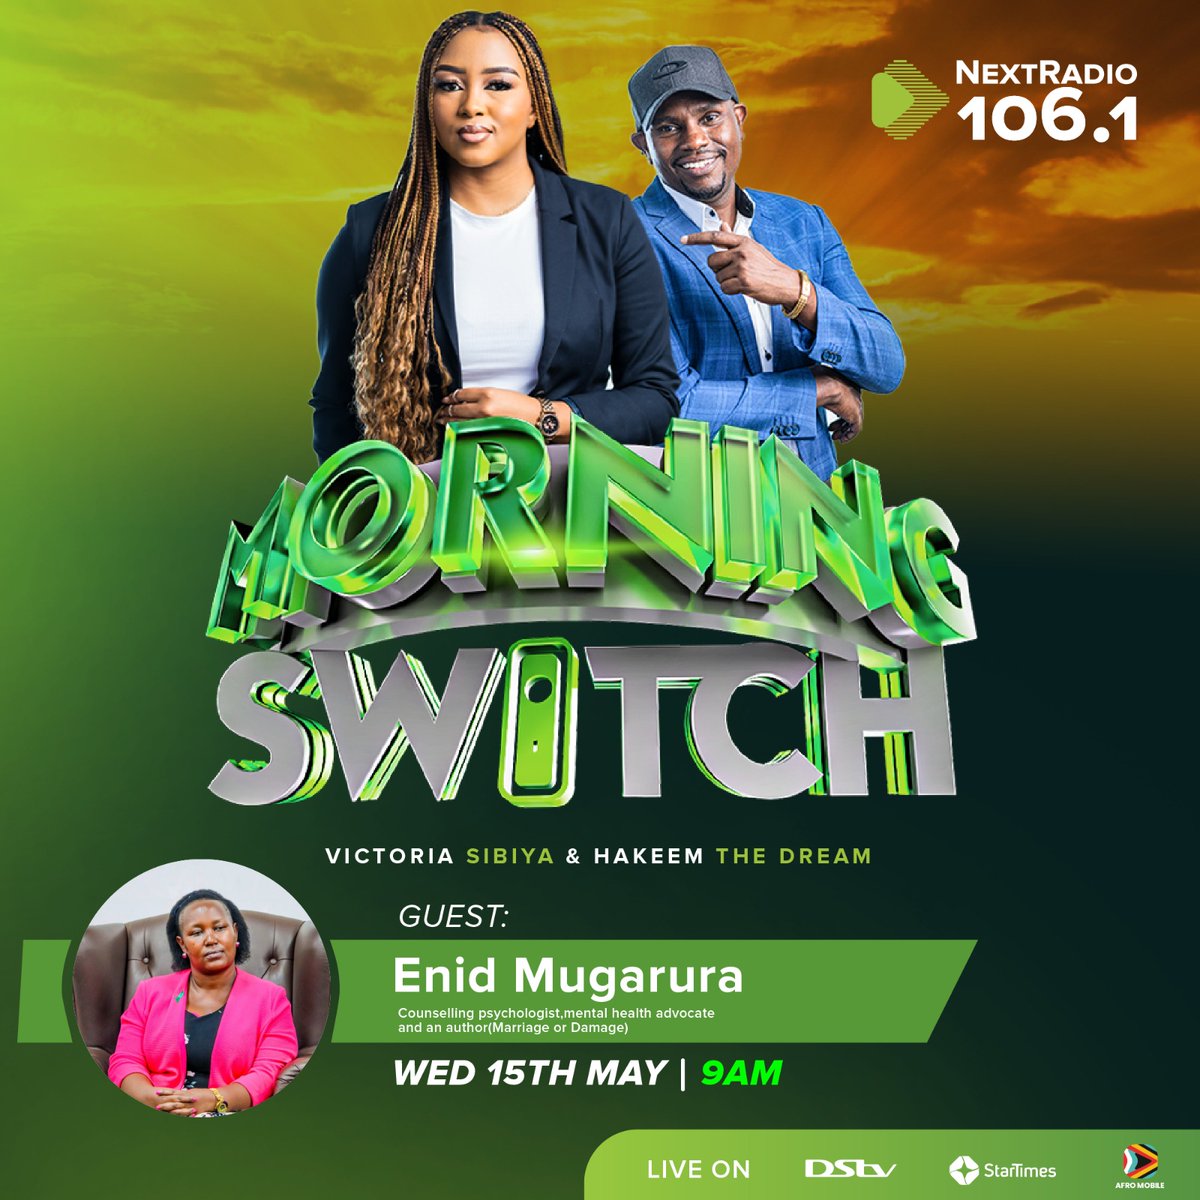 A recent review in UG found that 22.9% of children below the age of 18 years, and 24.2% of adults were suffering from a #MentalHealth issue. This, we cannot ignore.

Therefore, join us tomorrow morning as we host Ms. Enid on the #NextMorningSwitch.

#MindMattersWithNextRadio